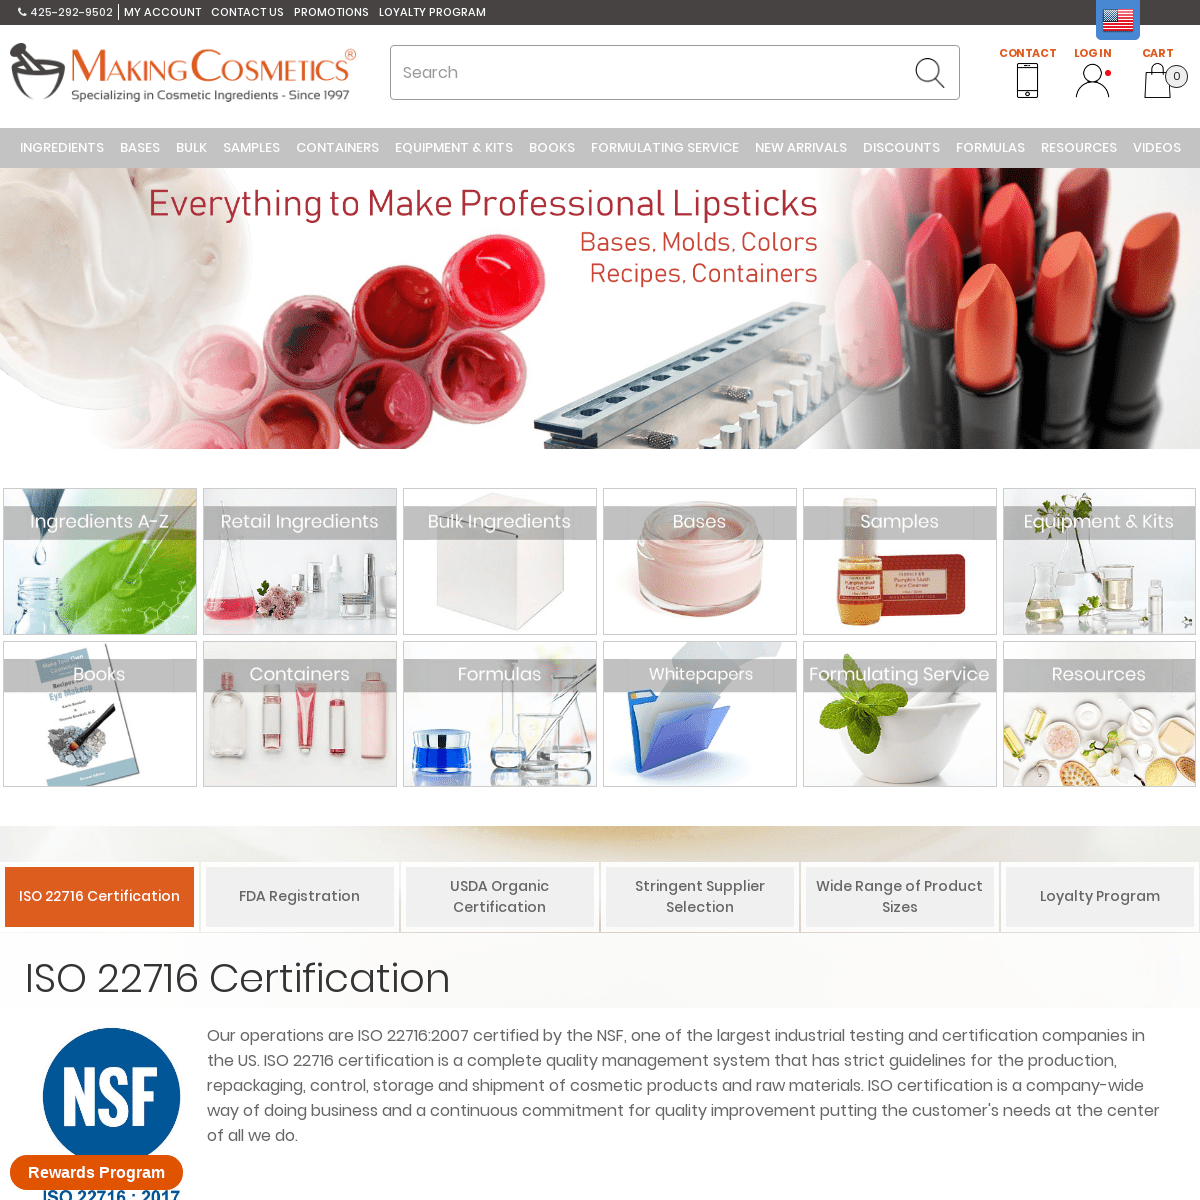 Wholesale Cosmetic Ingredients Supplier: Natural | Making Cosmetics 1997